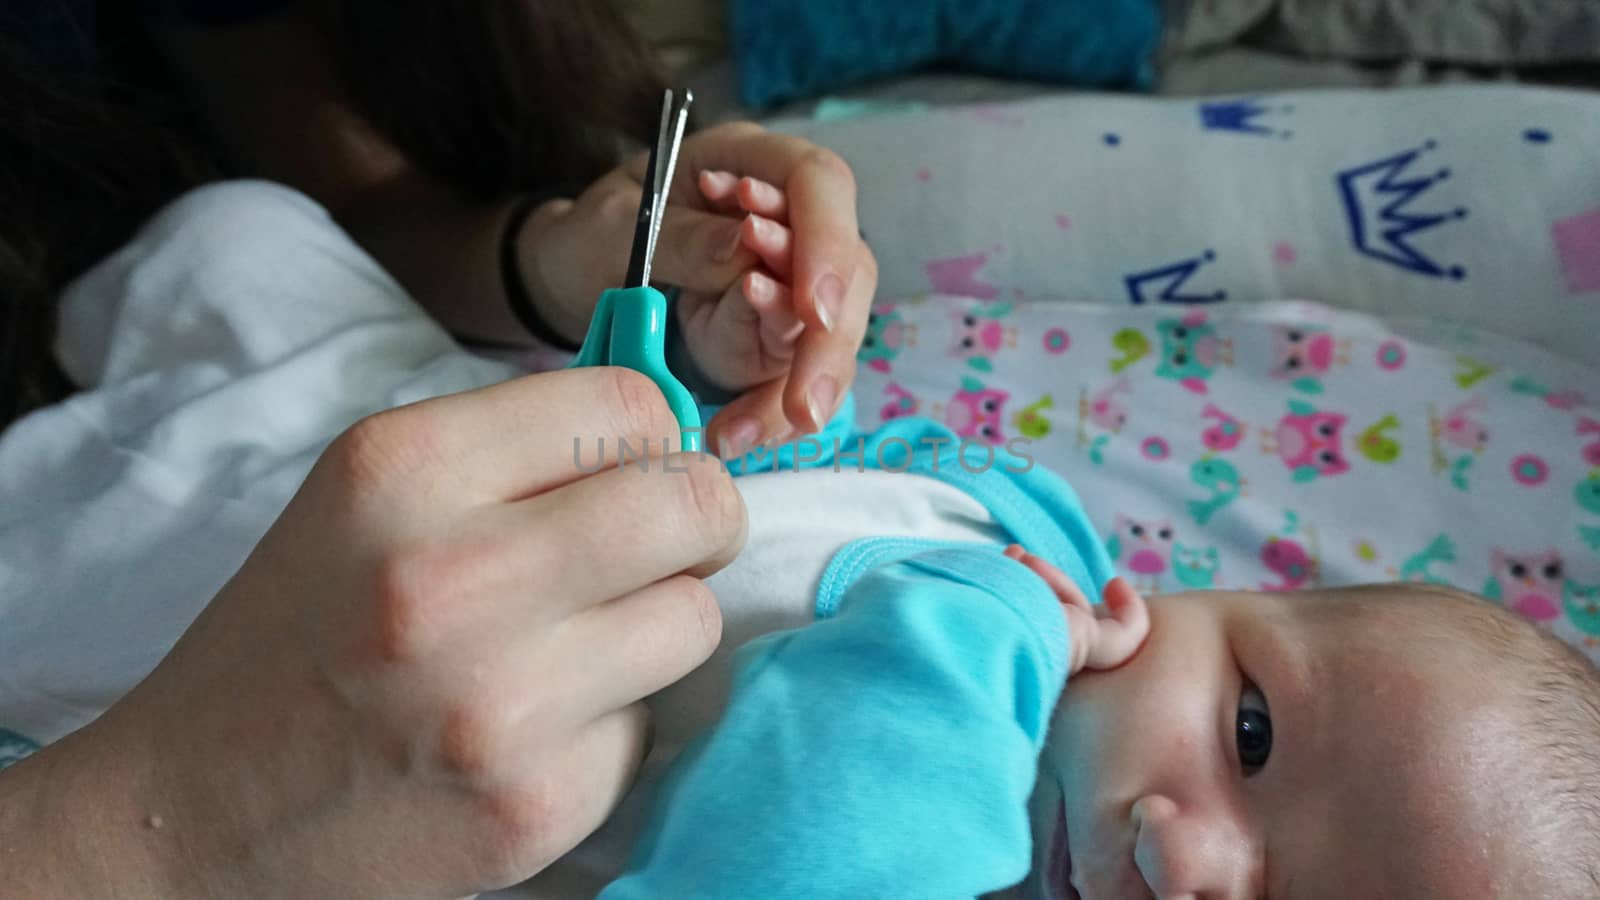 A newborn child's nails are cut with scissors. by Passcal